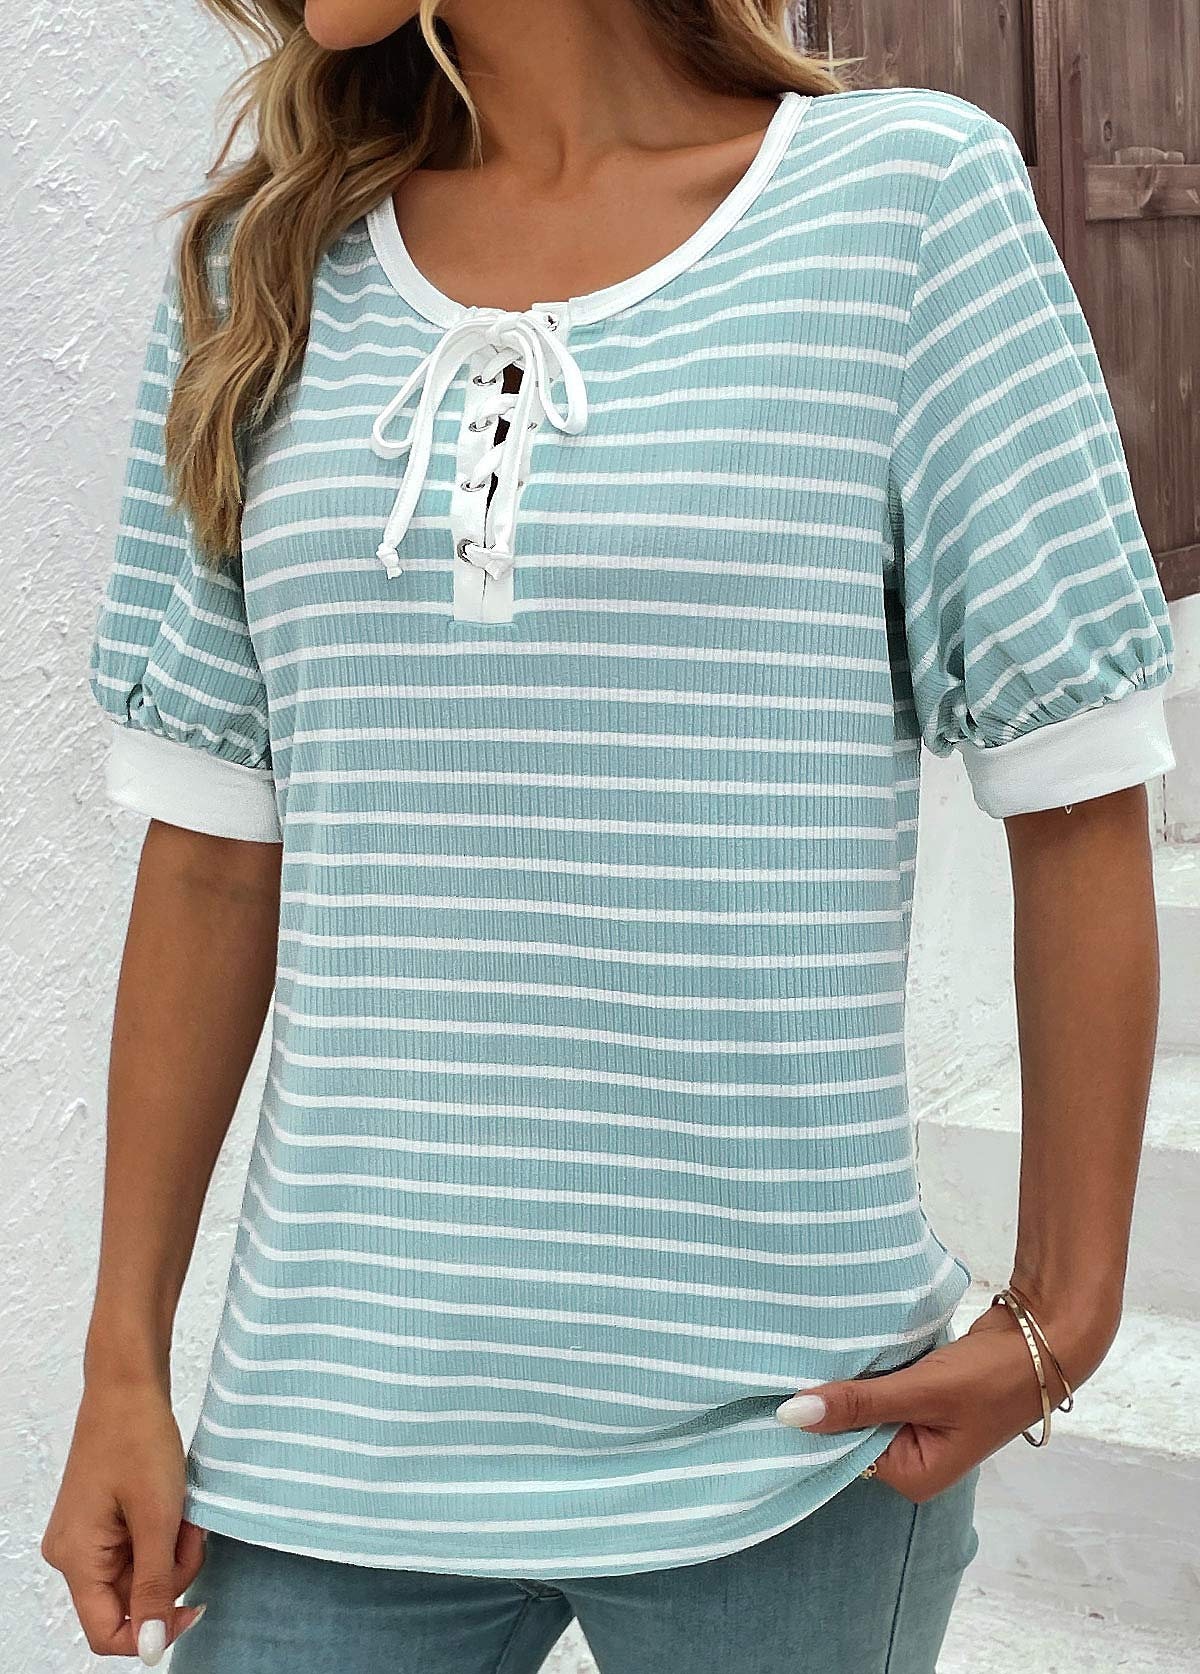 Lace Up Round Neck Mint Green T Shirt